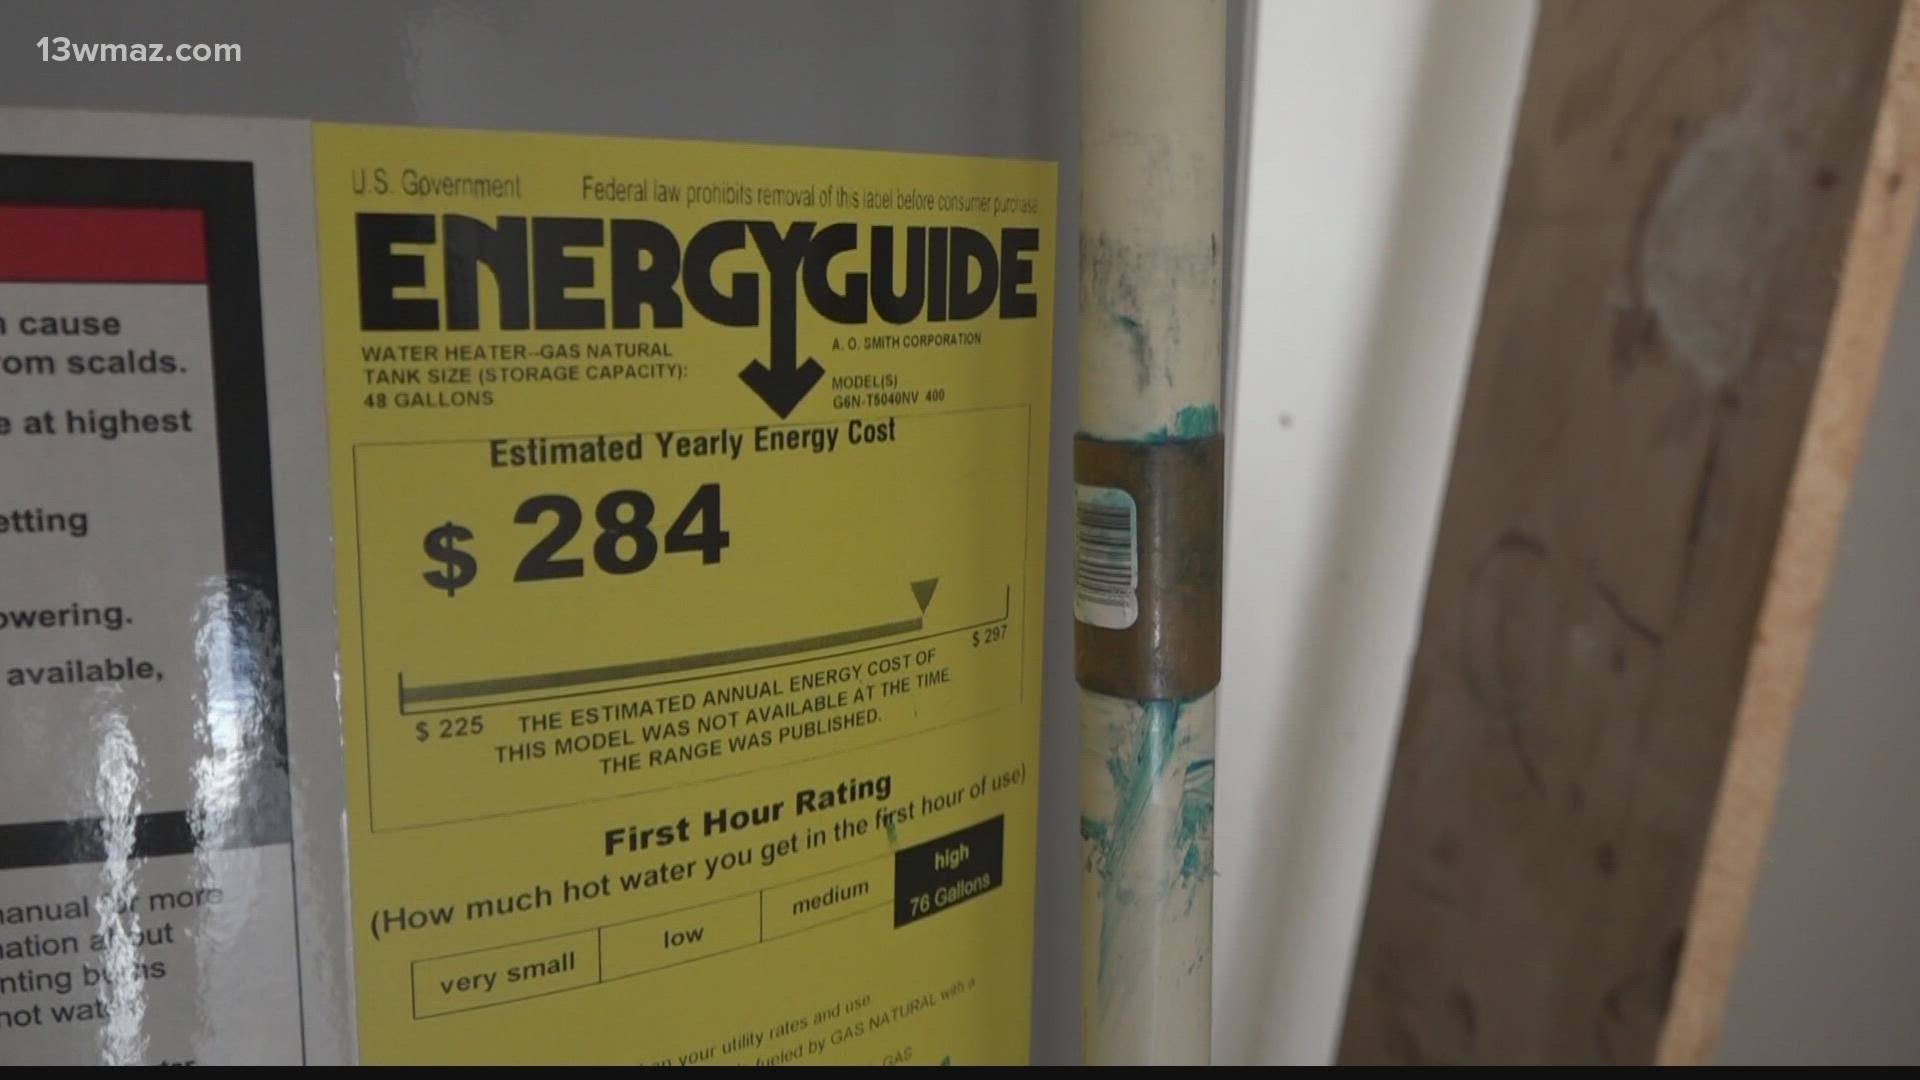 You may crank up the heat to stay warm over the next few days, but for Georgia Power customers, in the new year, it'll cost more.